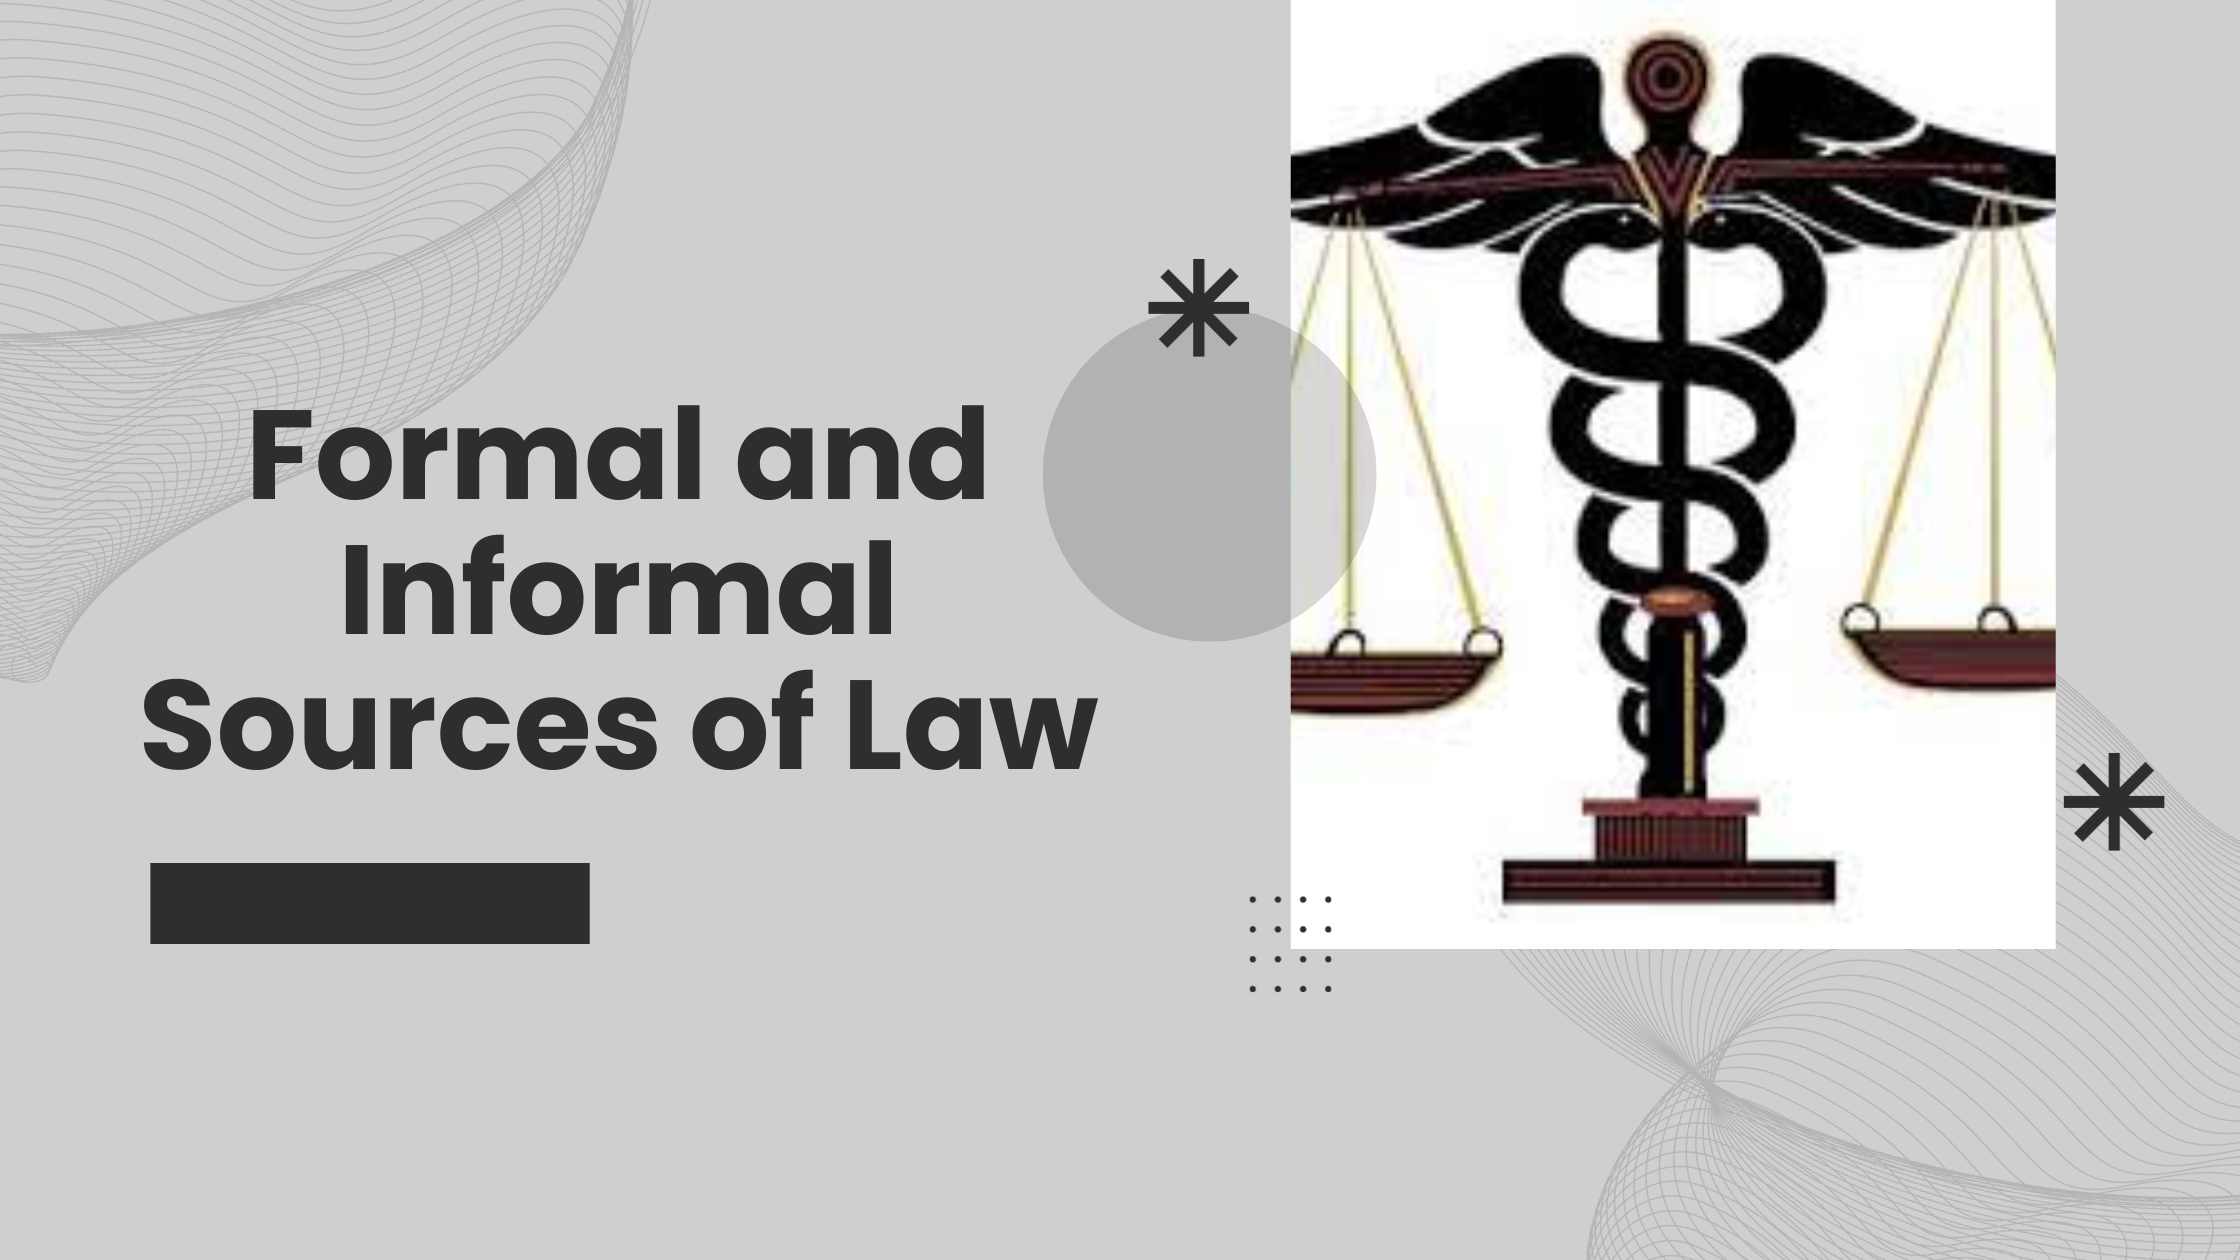 Formal and Informal Sources of Law